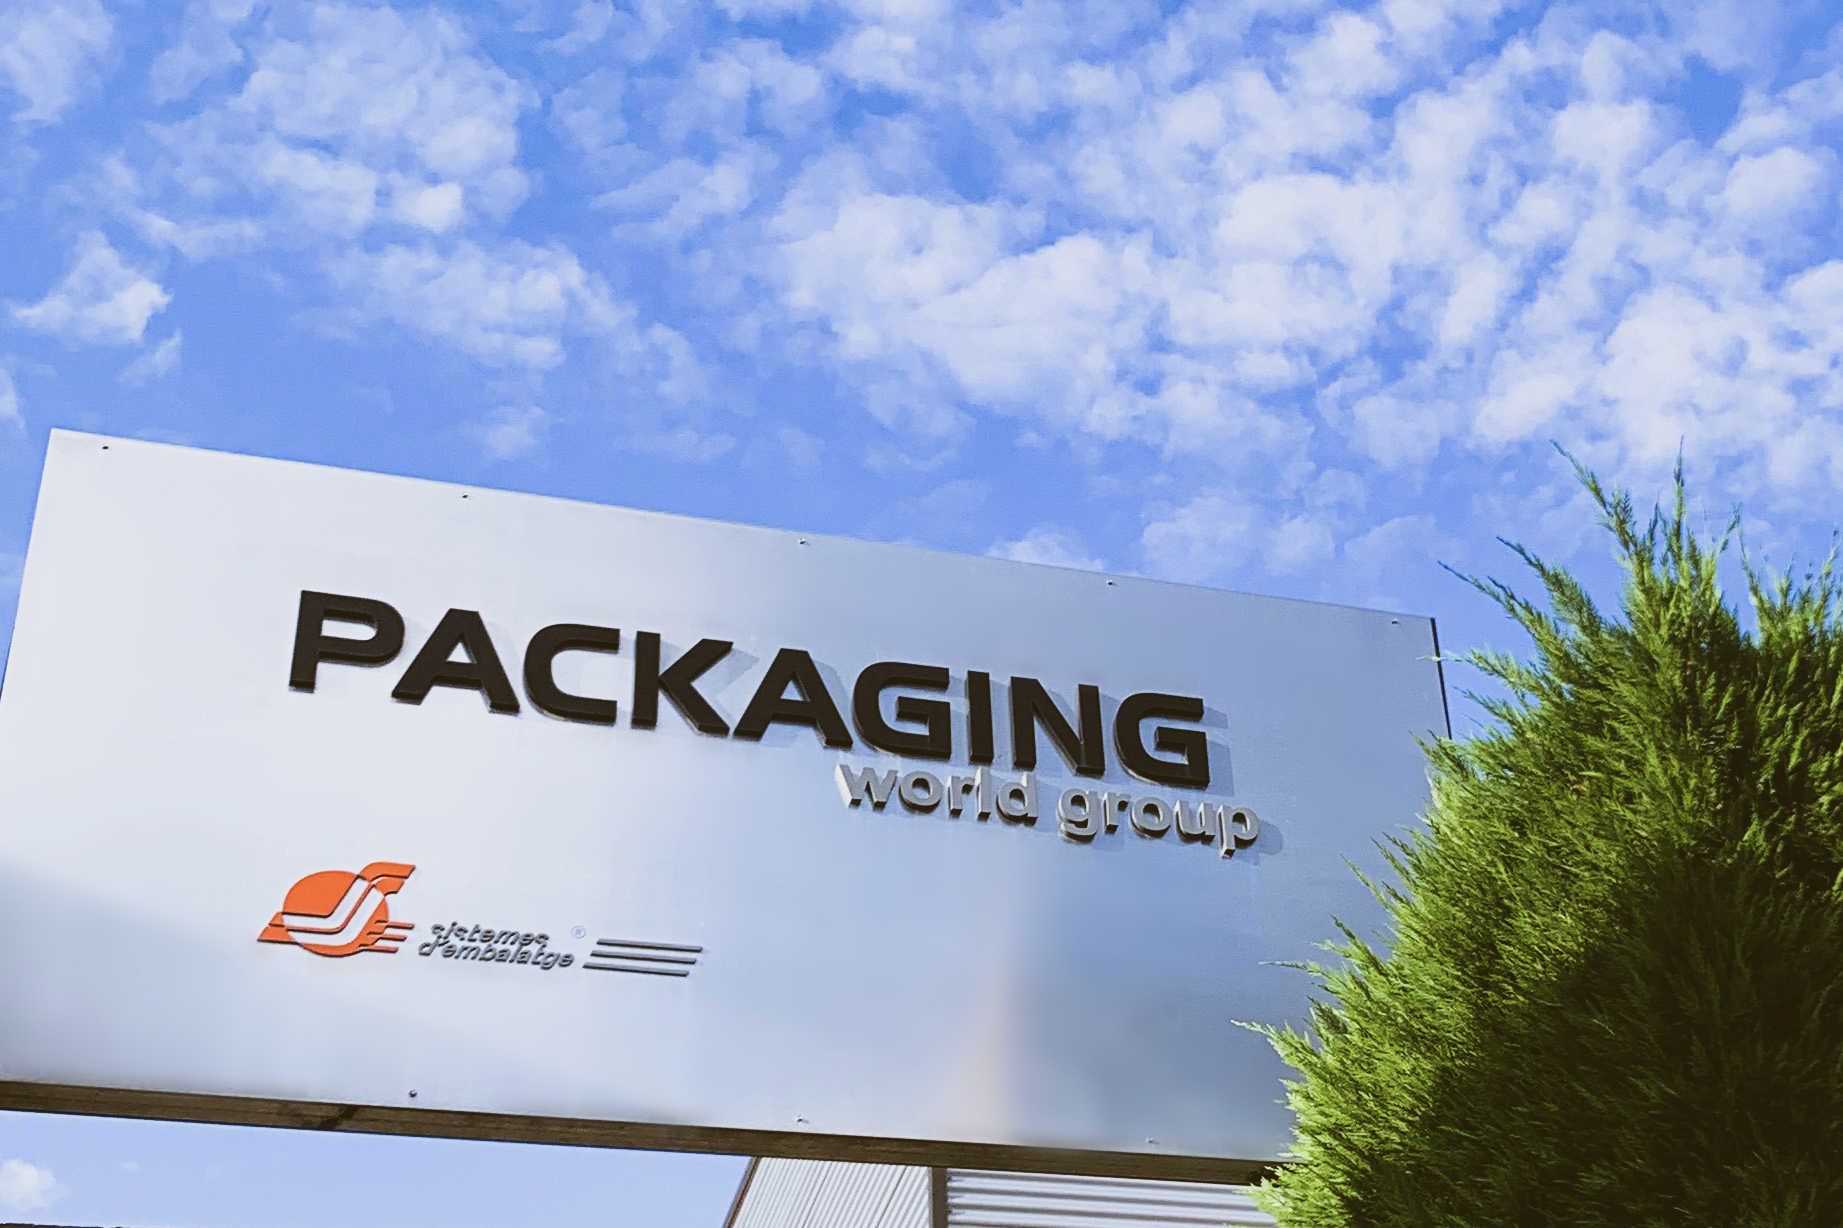 Packaging Wold Group exterior